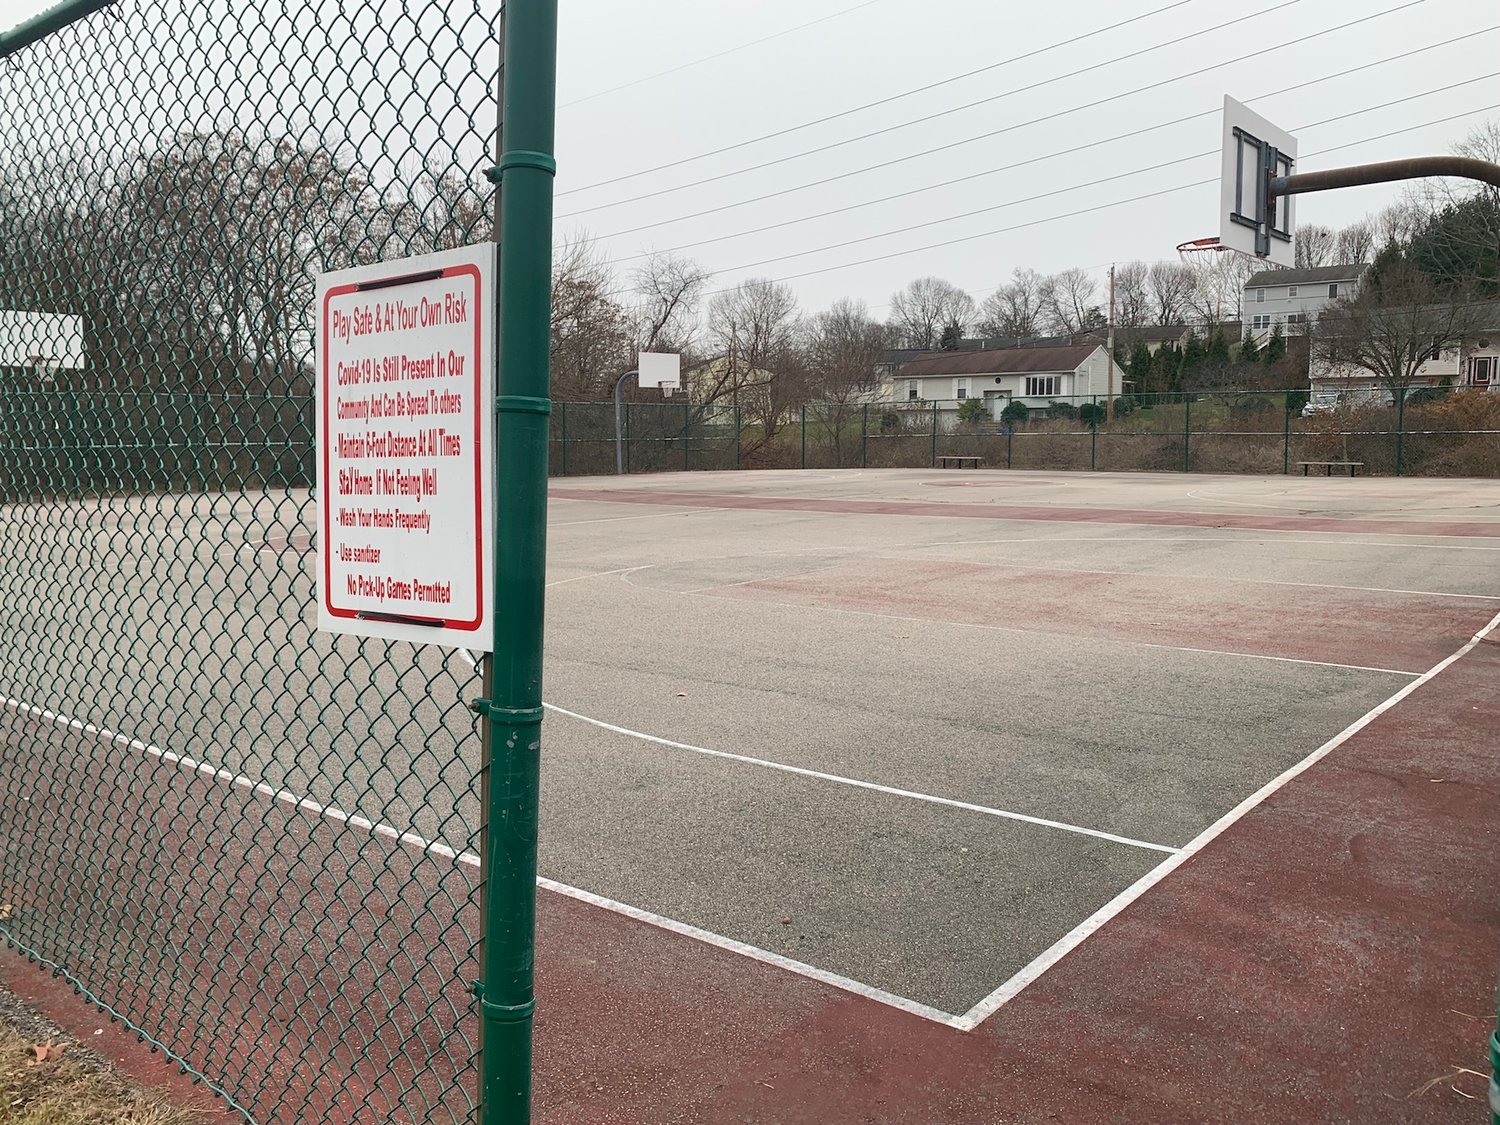 A view of the basketball courts at Kent Heights Playground.